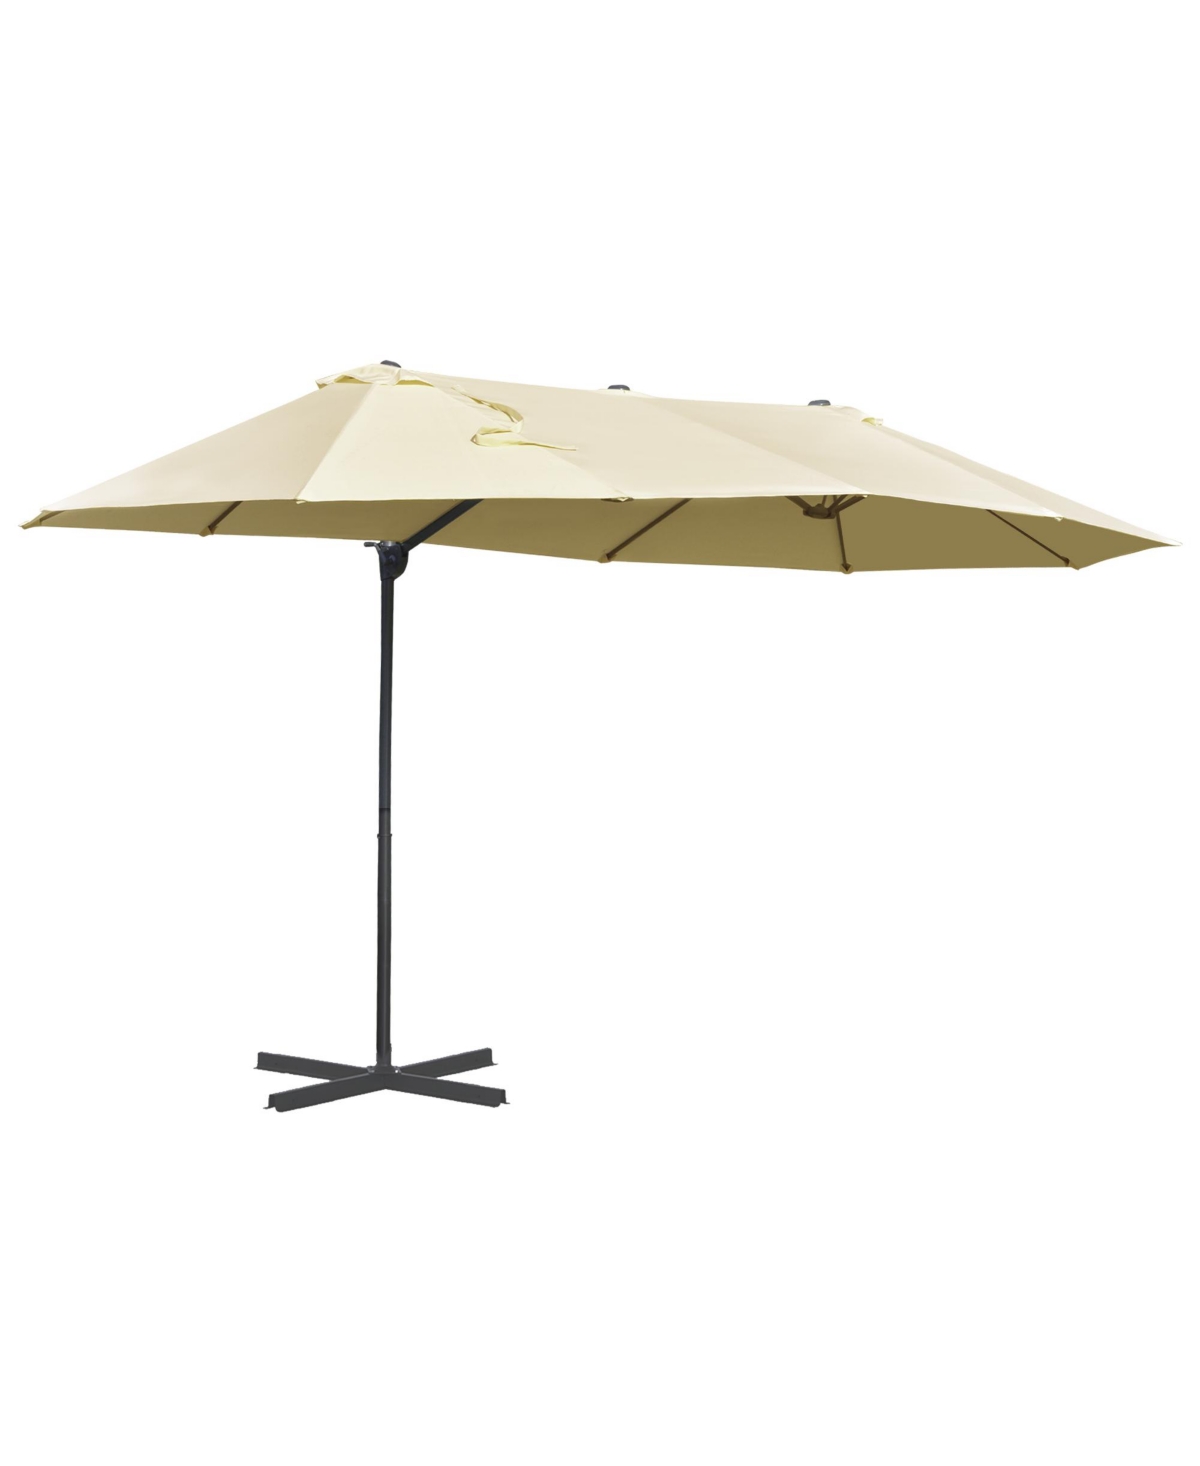 14ft Patio Umbrella Double-Sided Outdoor Market Extra Large Umbrella with Crank, Cross Base for Deck, Lawn, Backyard and Pool - Beige